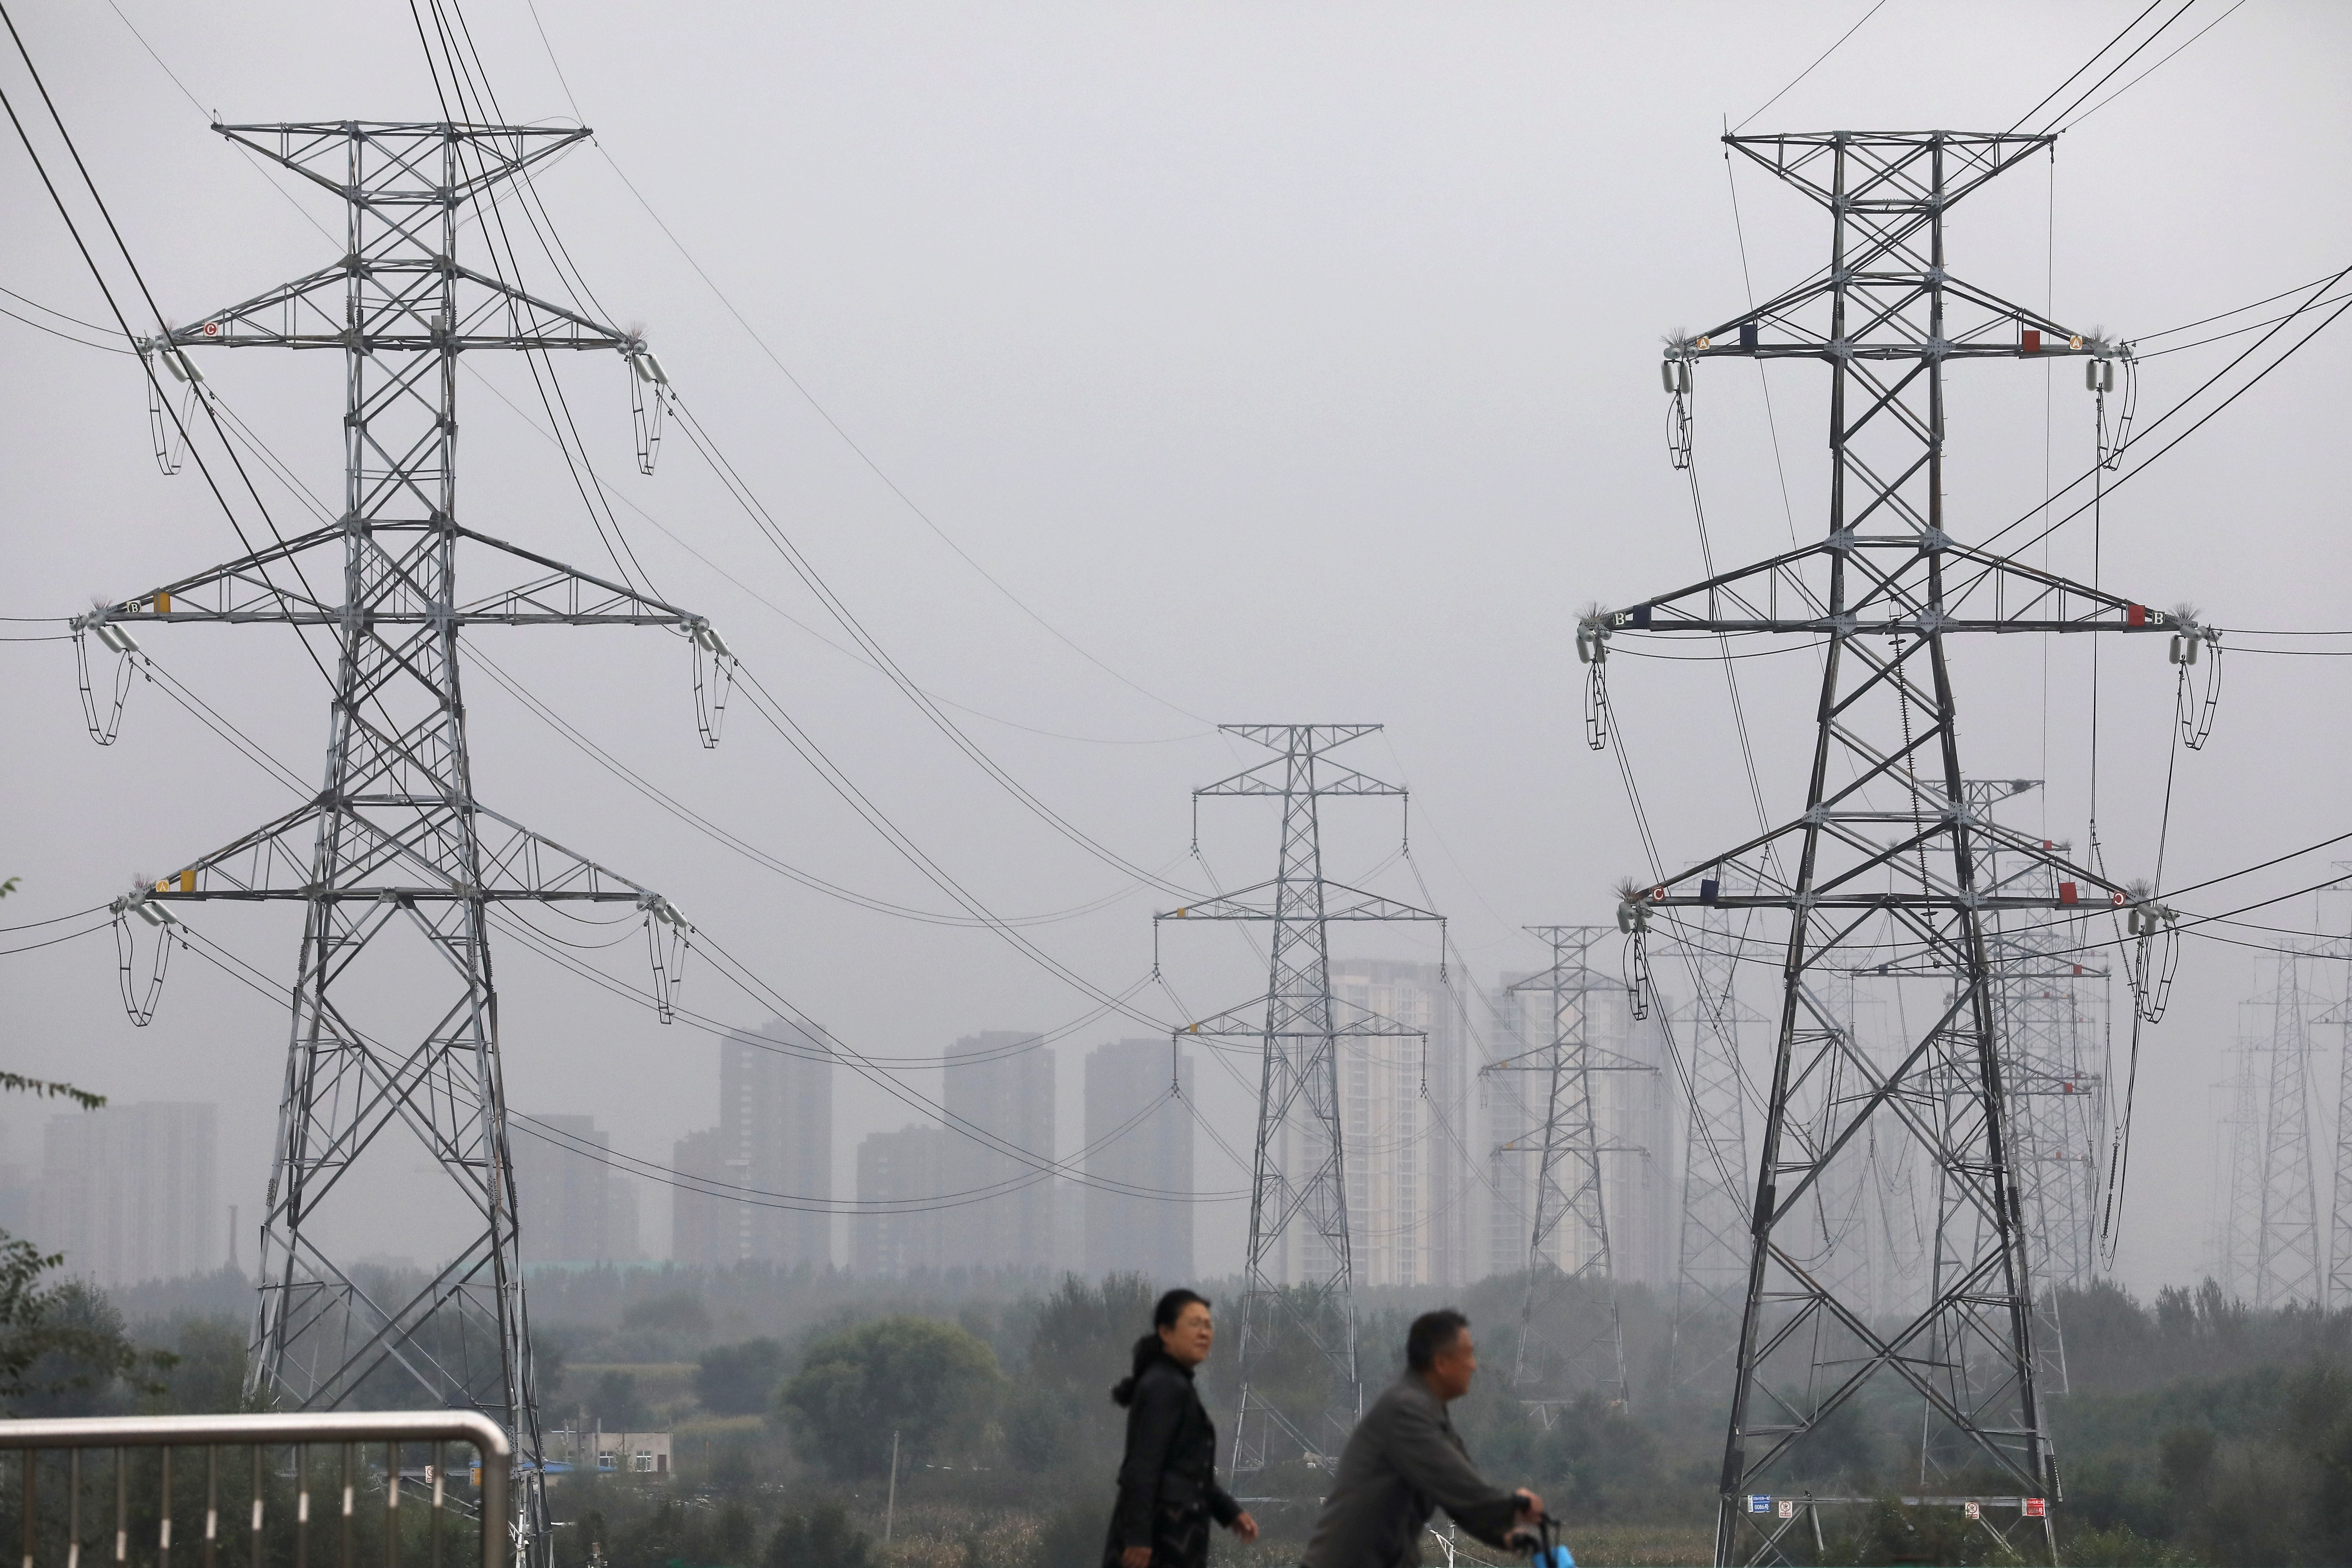 People walk past electricity pylons in Shenyang